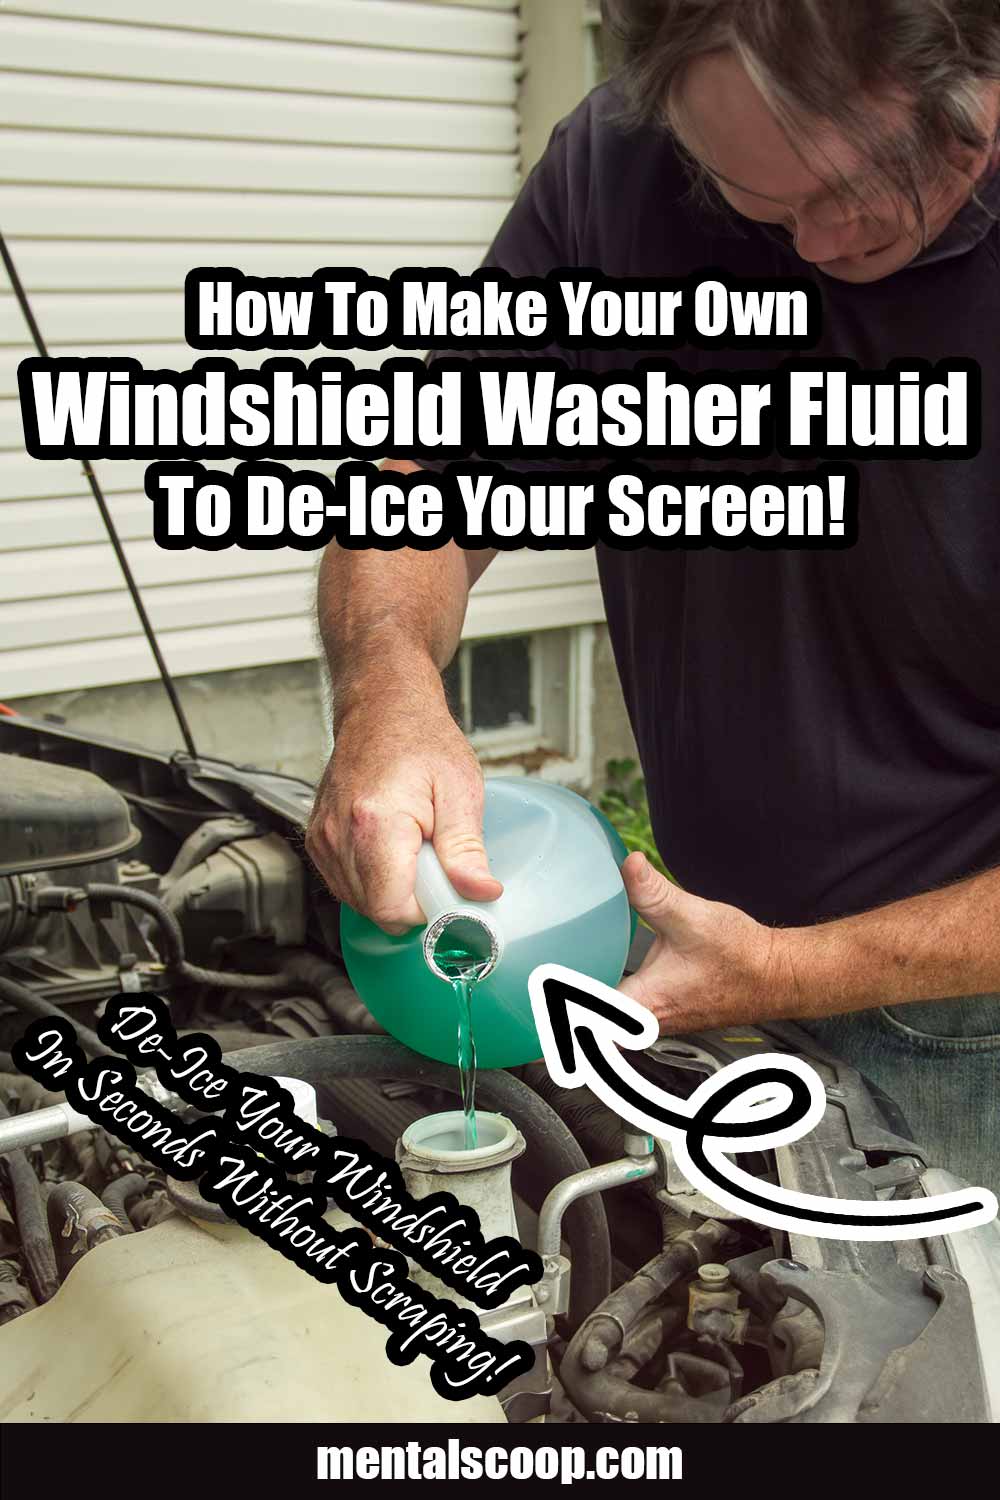 How to Make Your Own Windshield Washer Fluid